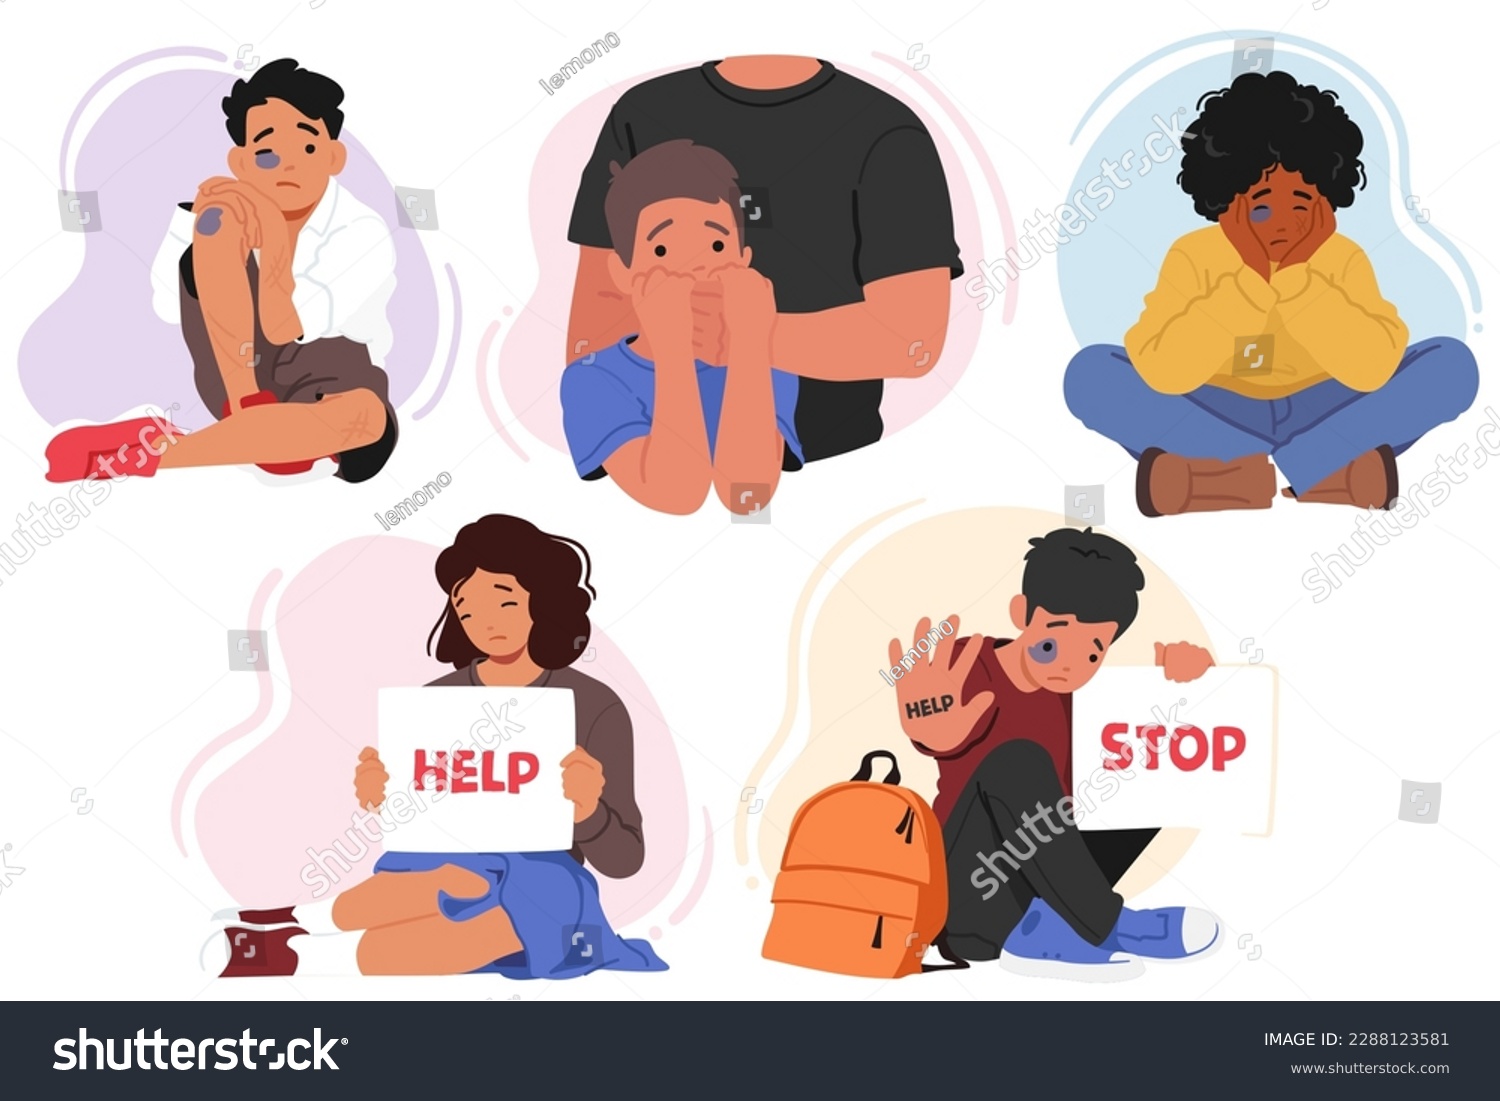 Children Subjected To Domestic Violence Suffer From Emotional, Physical And Psychological Trauma. Concept of Kids Abuse Problem with Boys and Girls Characters. Cartoon People Vector Illustration #2288123581